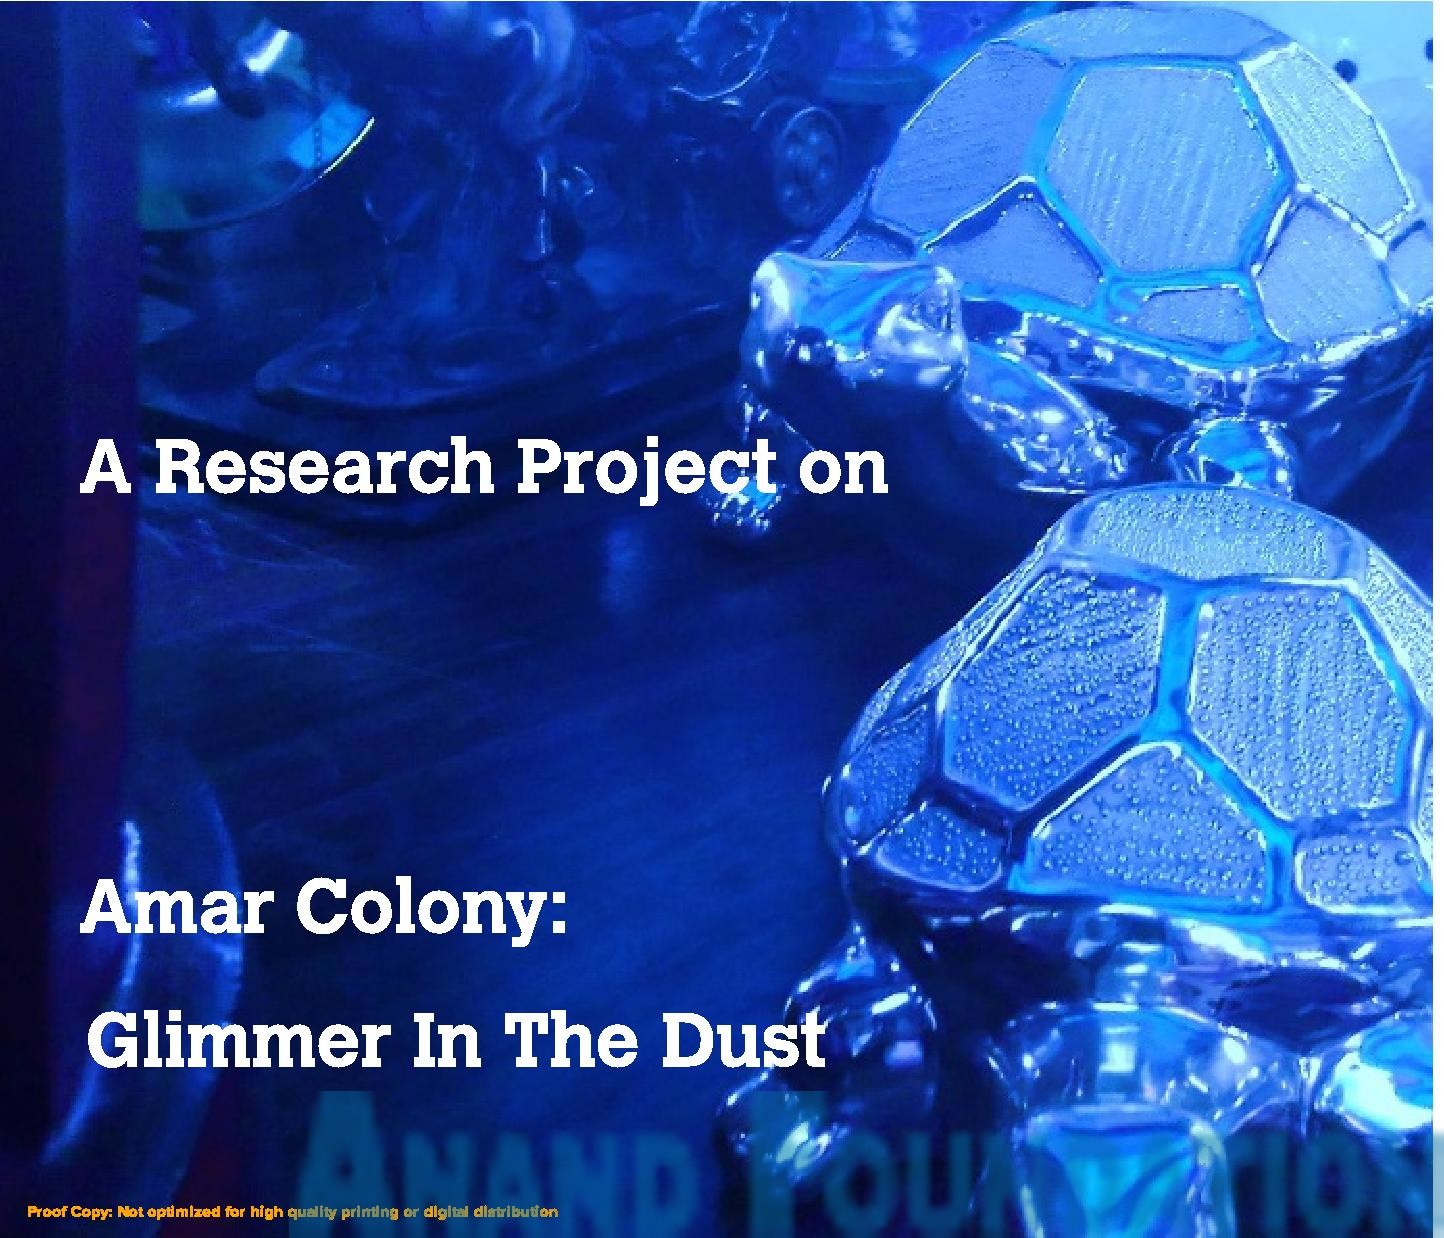 Amar Colony - Glimmer in the dust